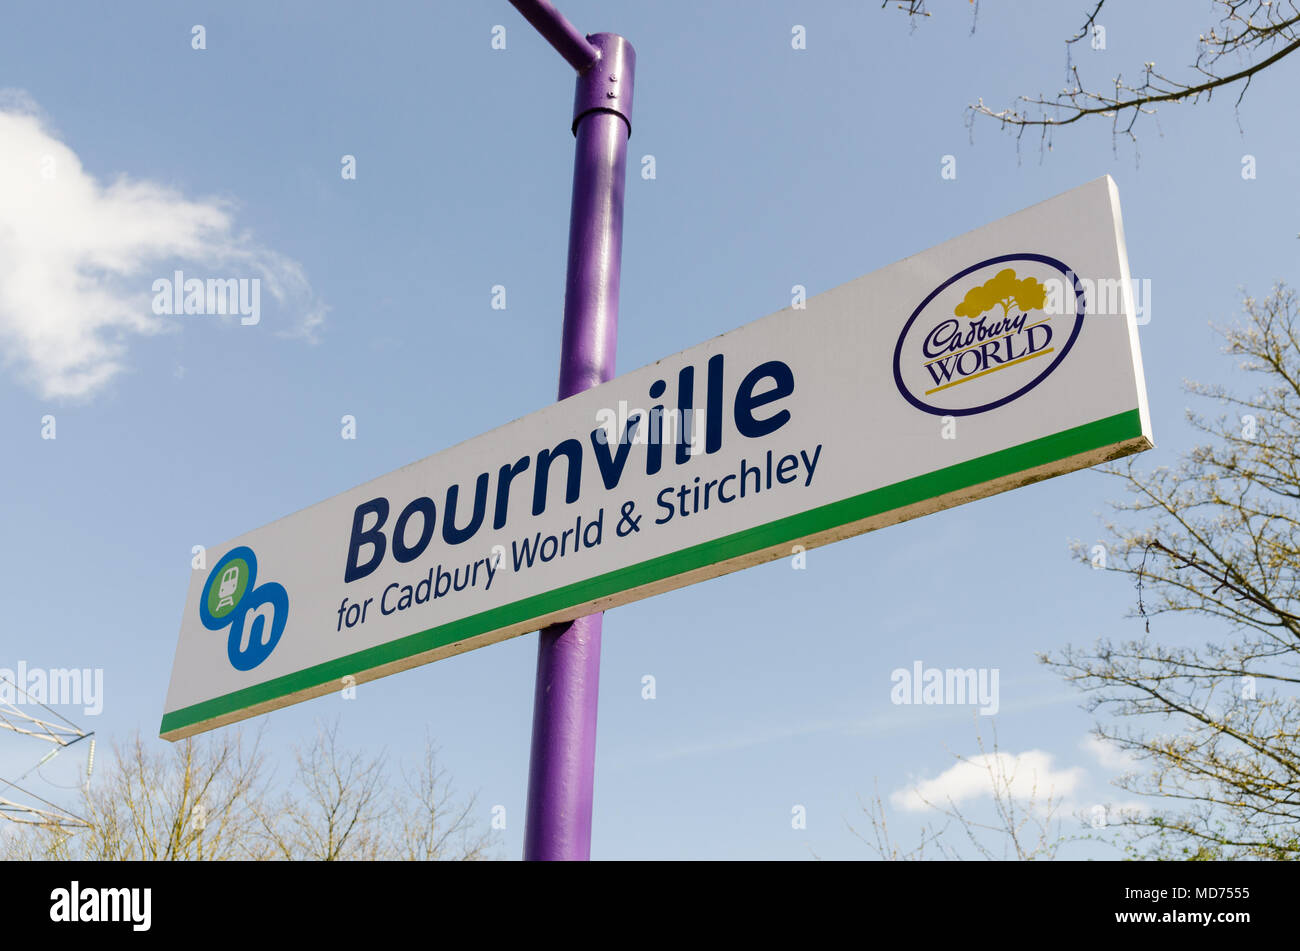 Bournville train station which serves the Cadbury chocolate factory and Cadbury World in Bournville Lane,Bournville, Birmingham, UK Stock Photo